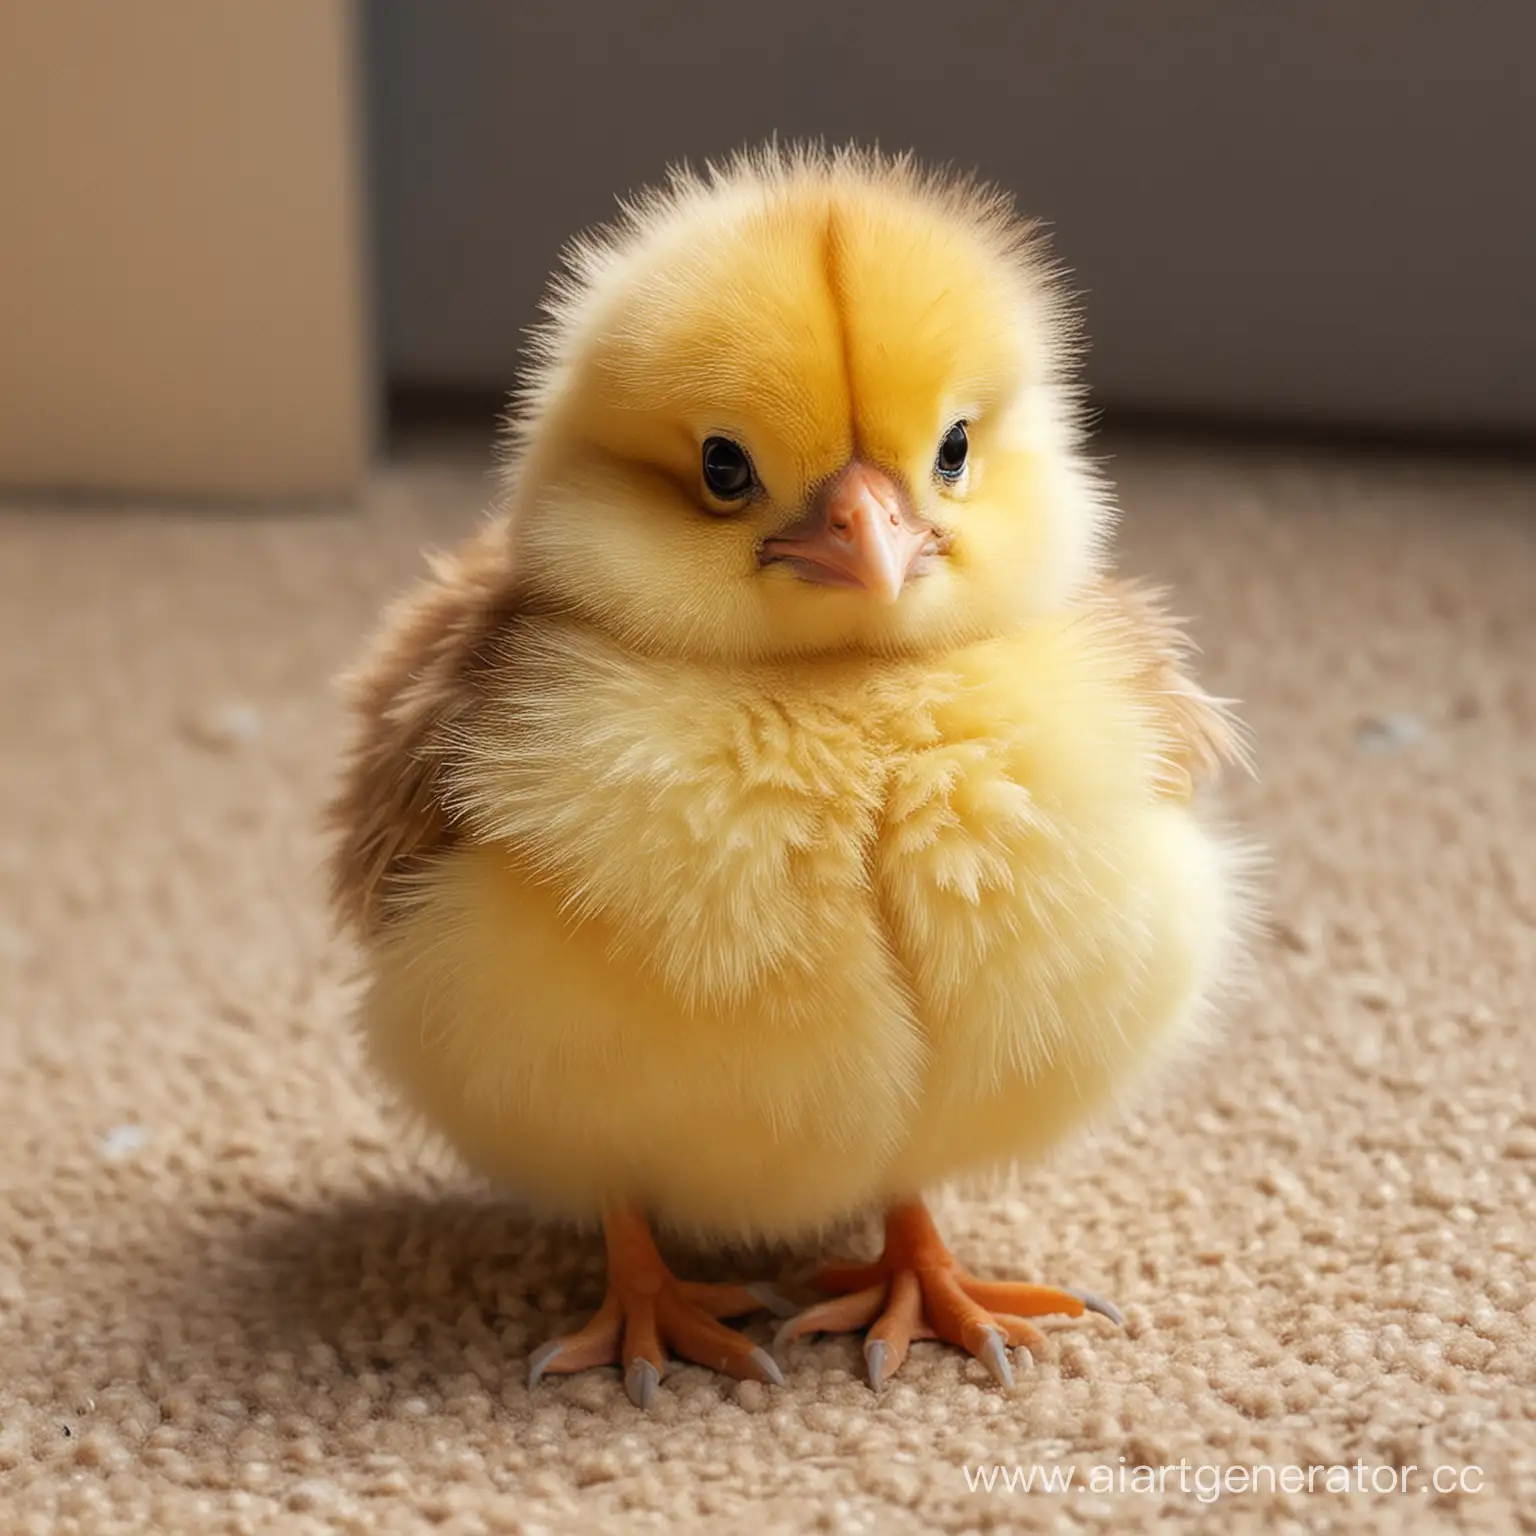 Adorable-Fluffy-Little-Chick-Hatching-from-Egg